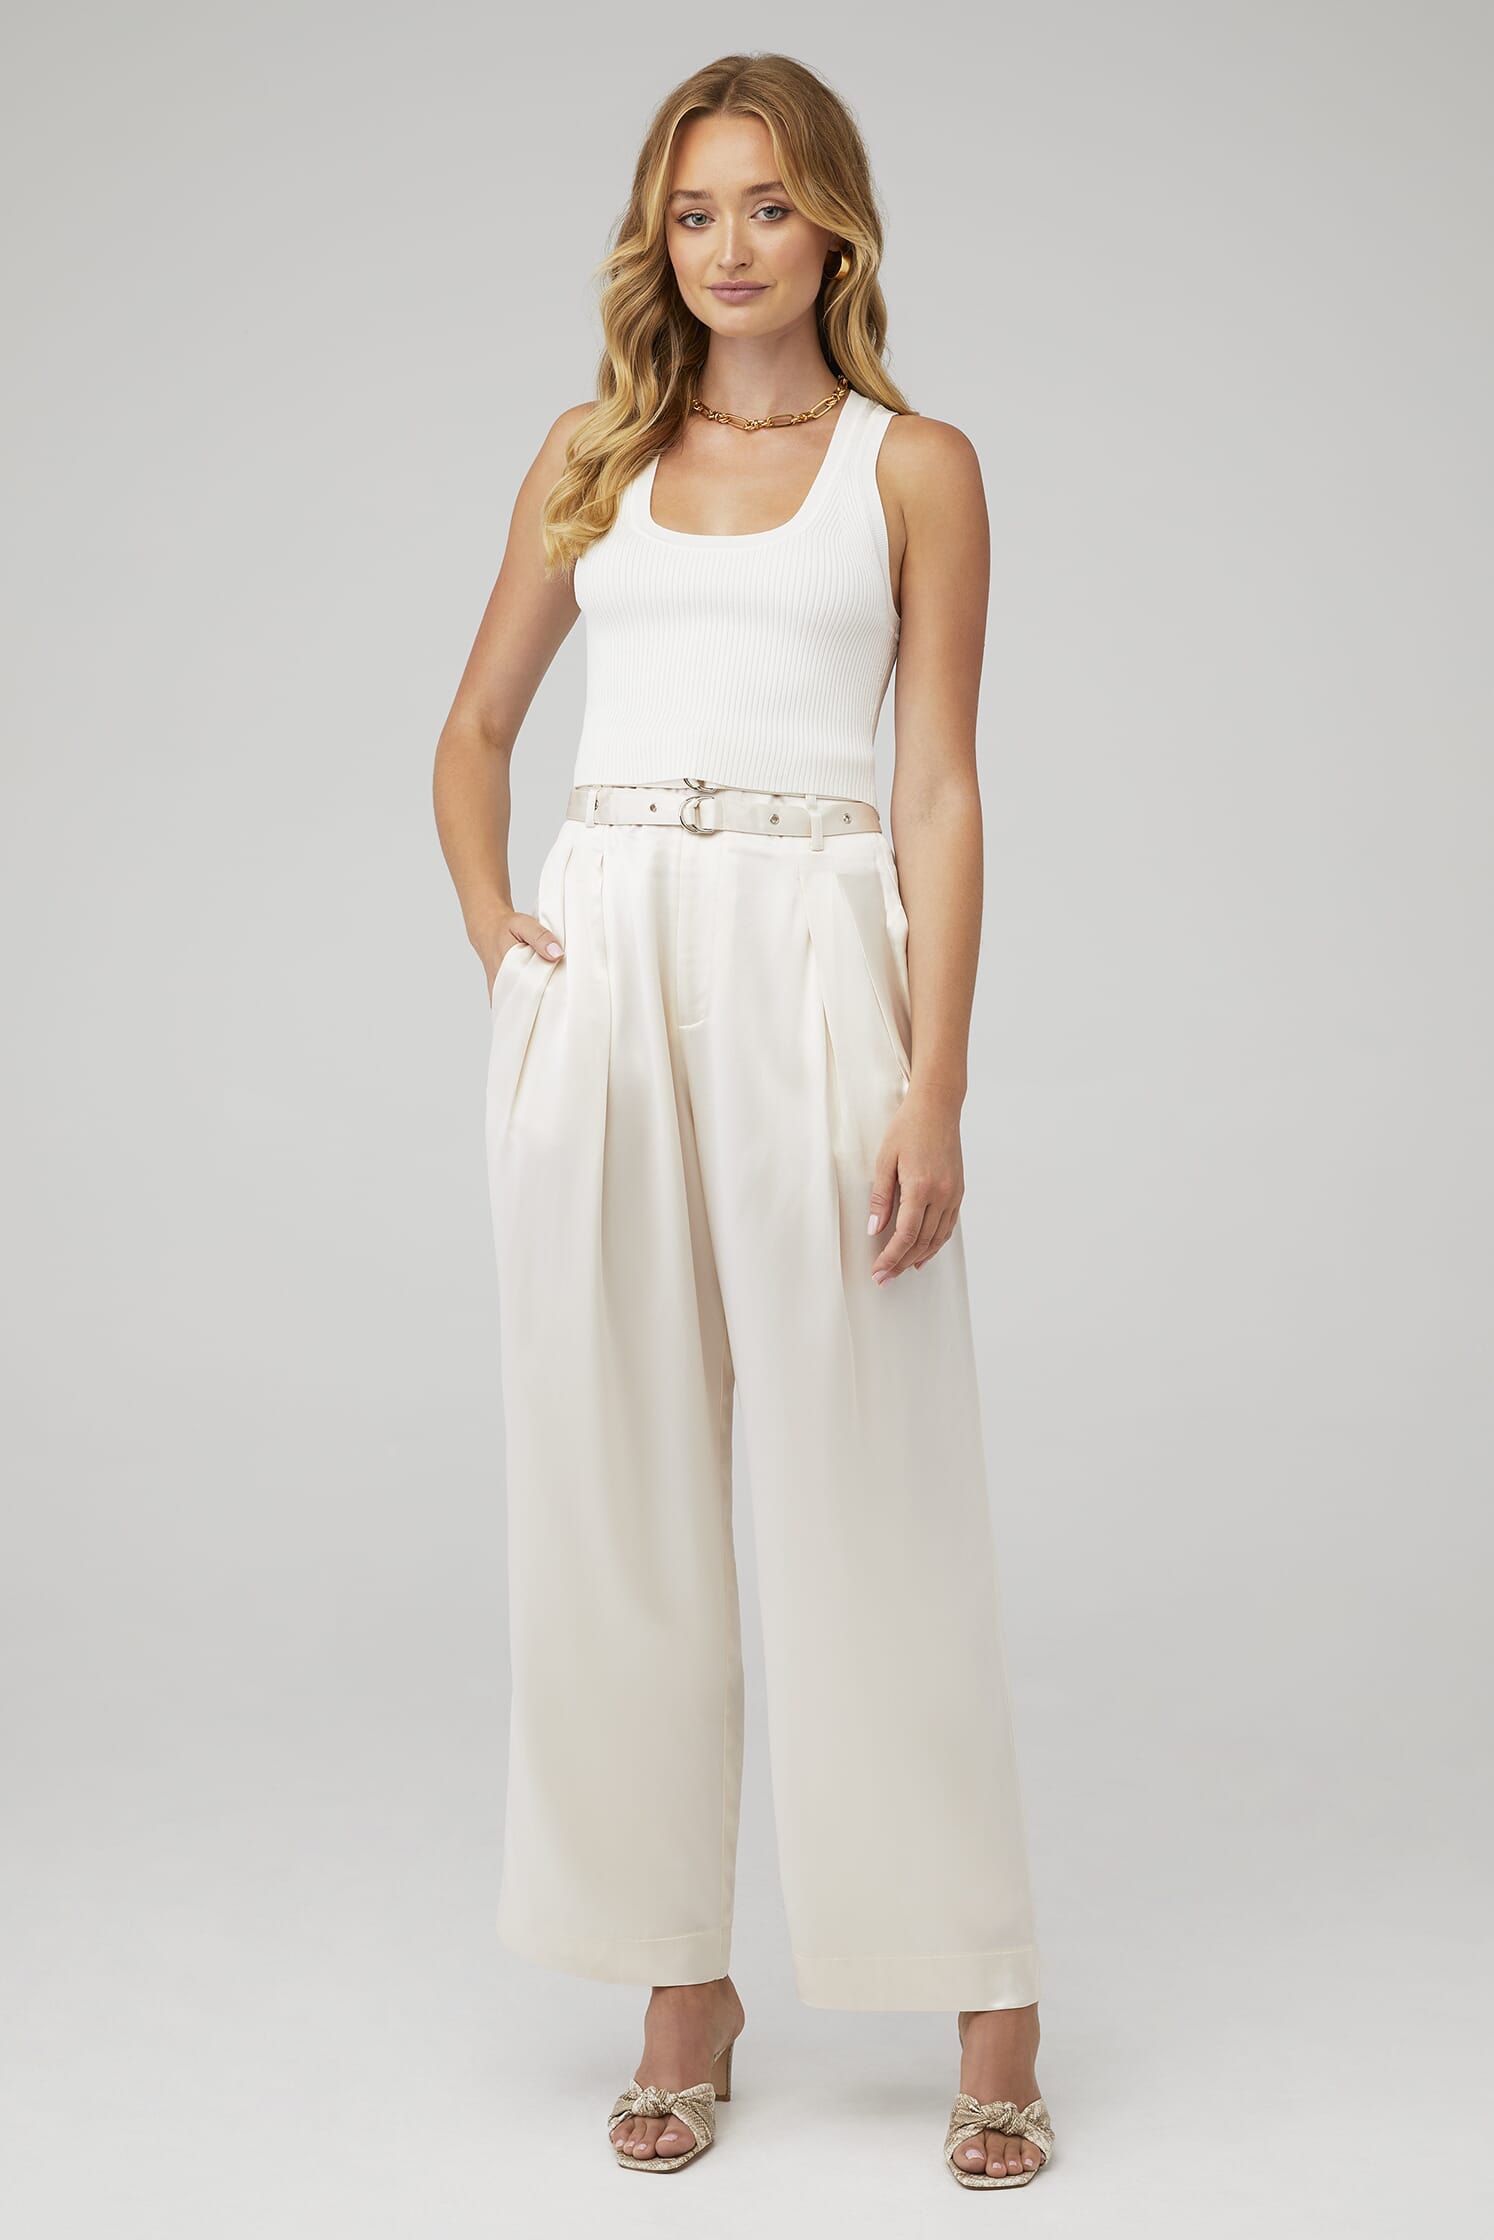 Nonchalant Label | Eve Crop in White| FashionPass